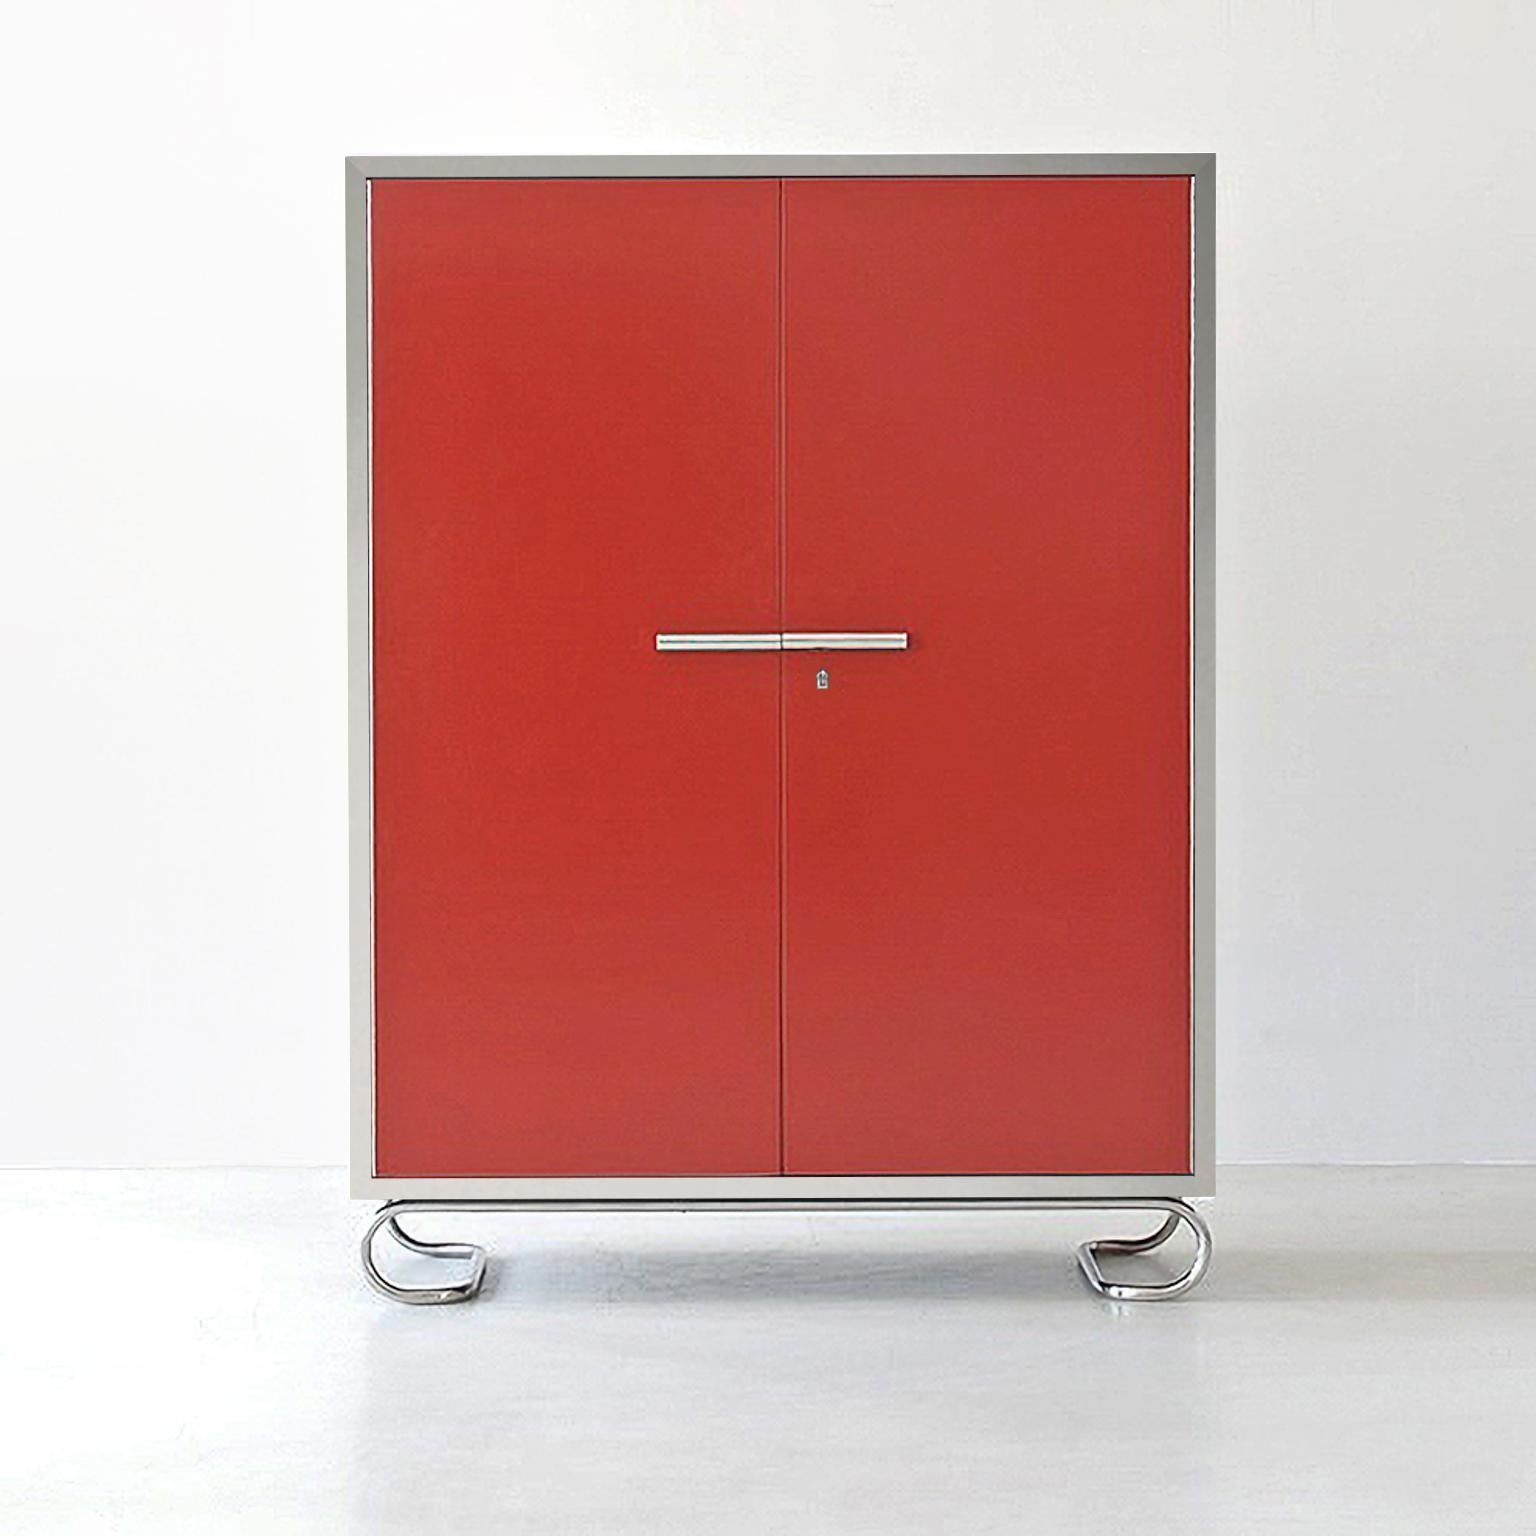 German Modernist Storage Cabinet in Lacquered Wood and Tubular Steel Hardware, Bespoke For Sale